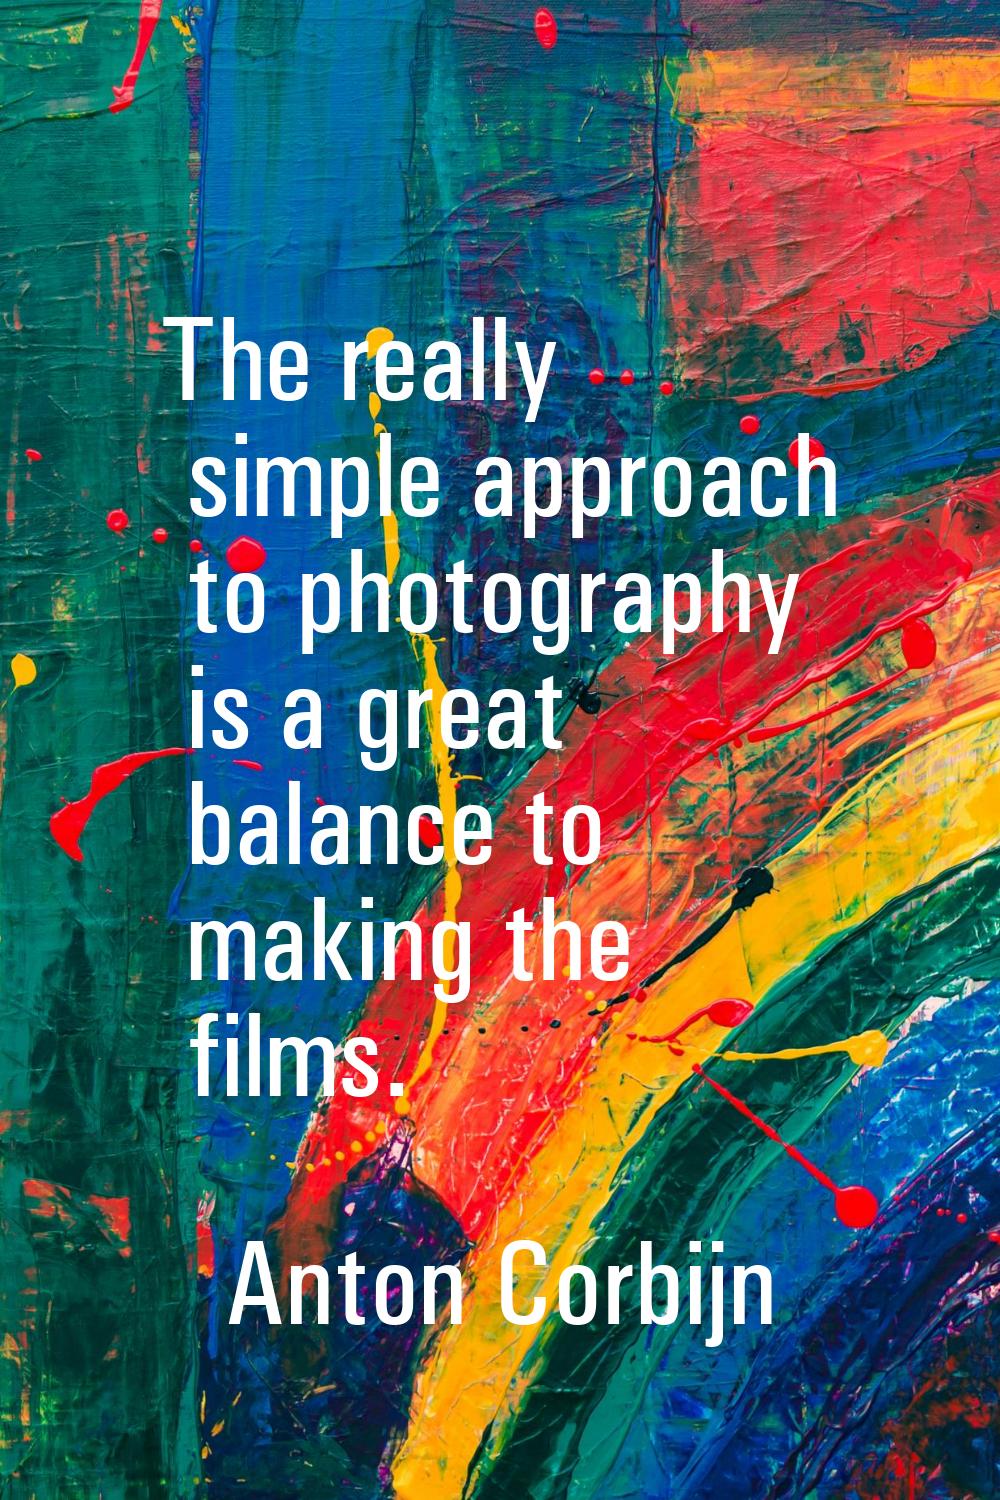 The really simple approach to photography is a great balance to making the films.